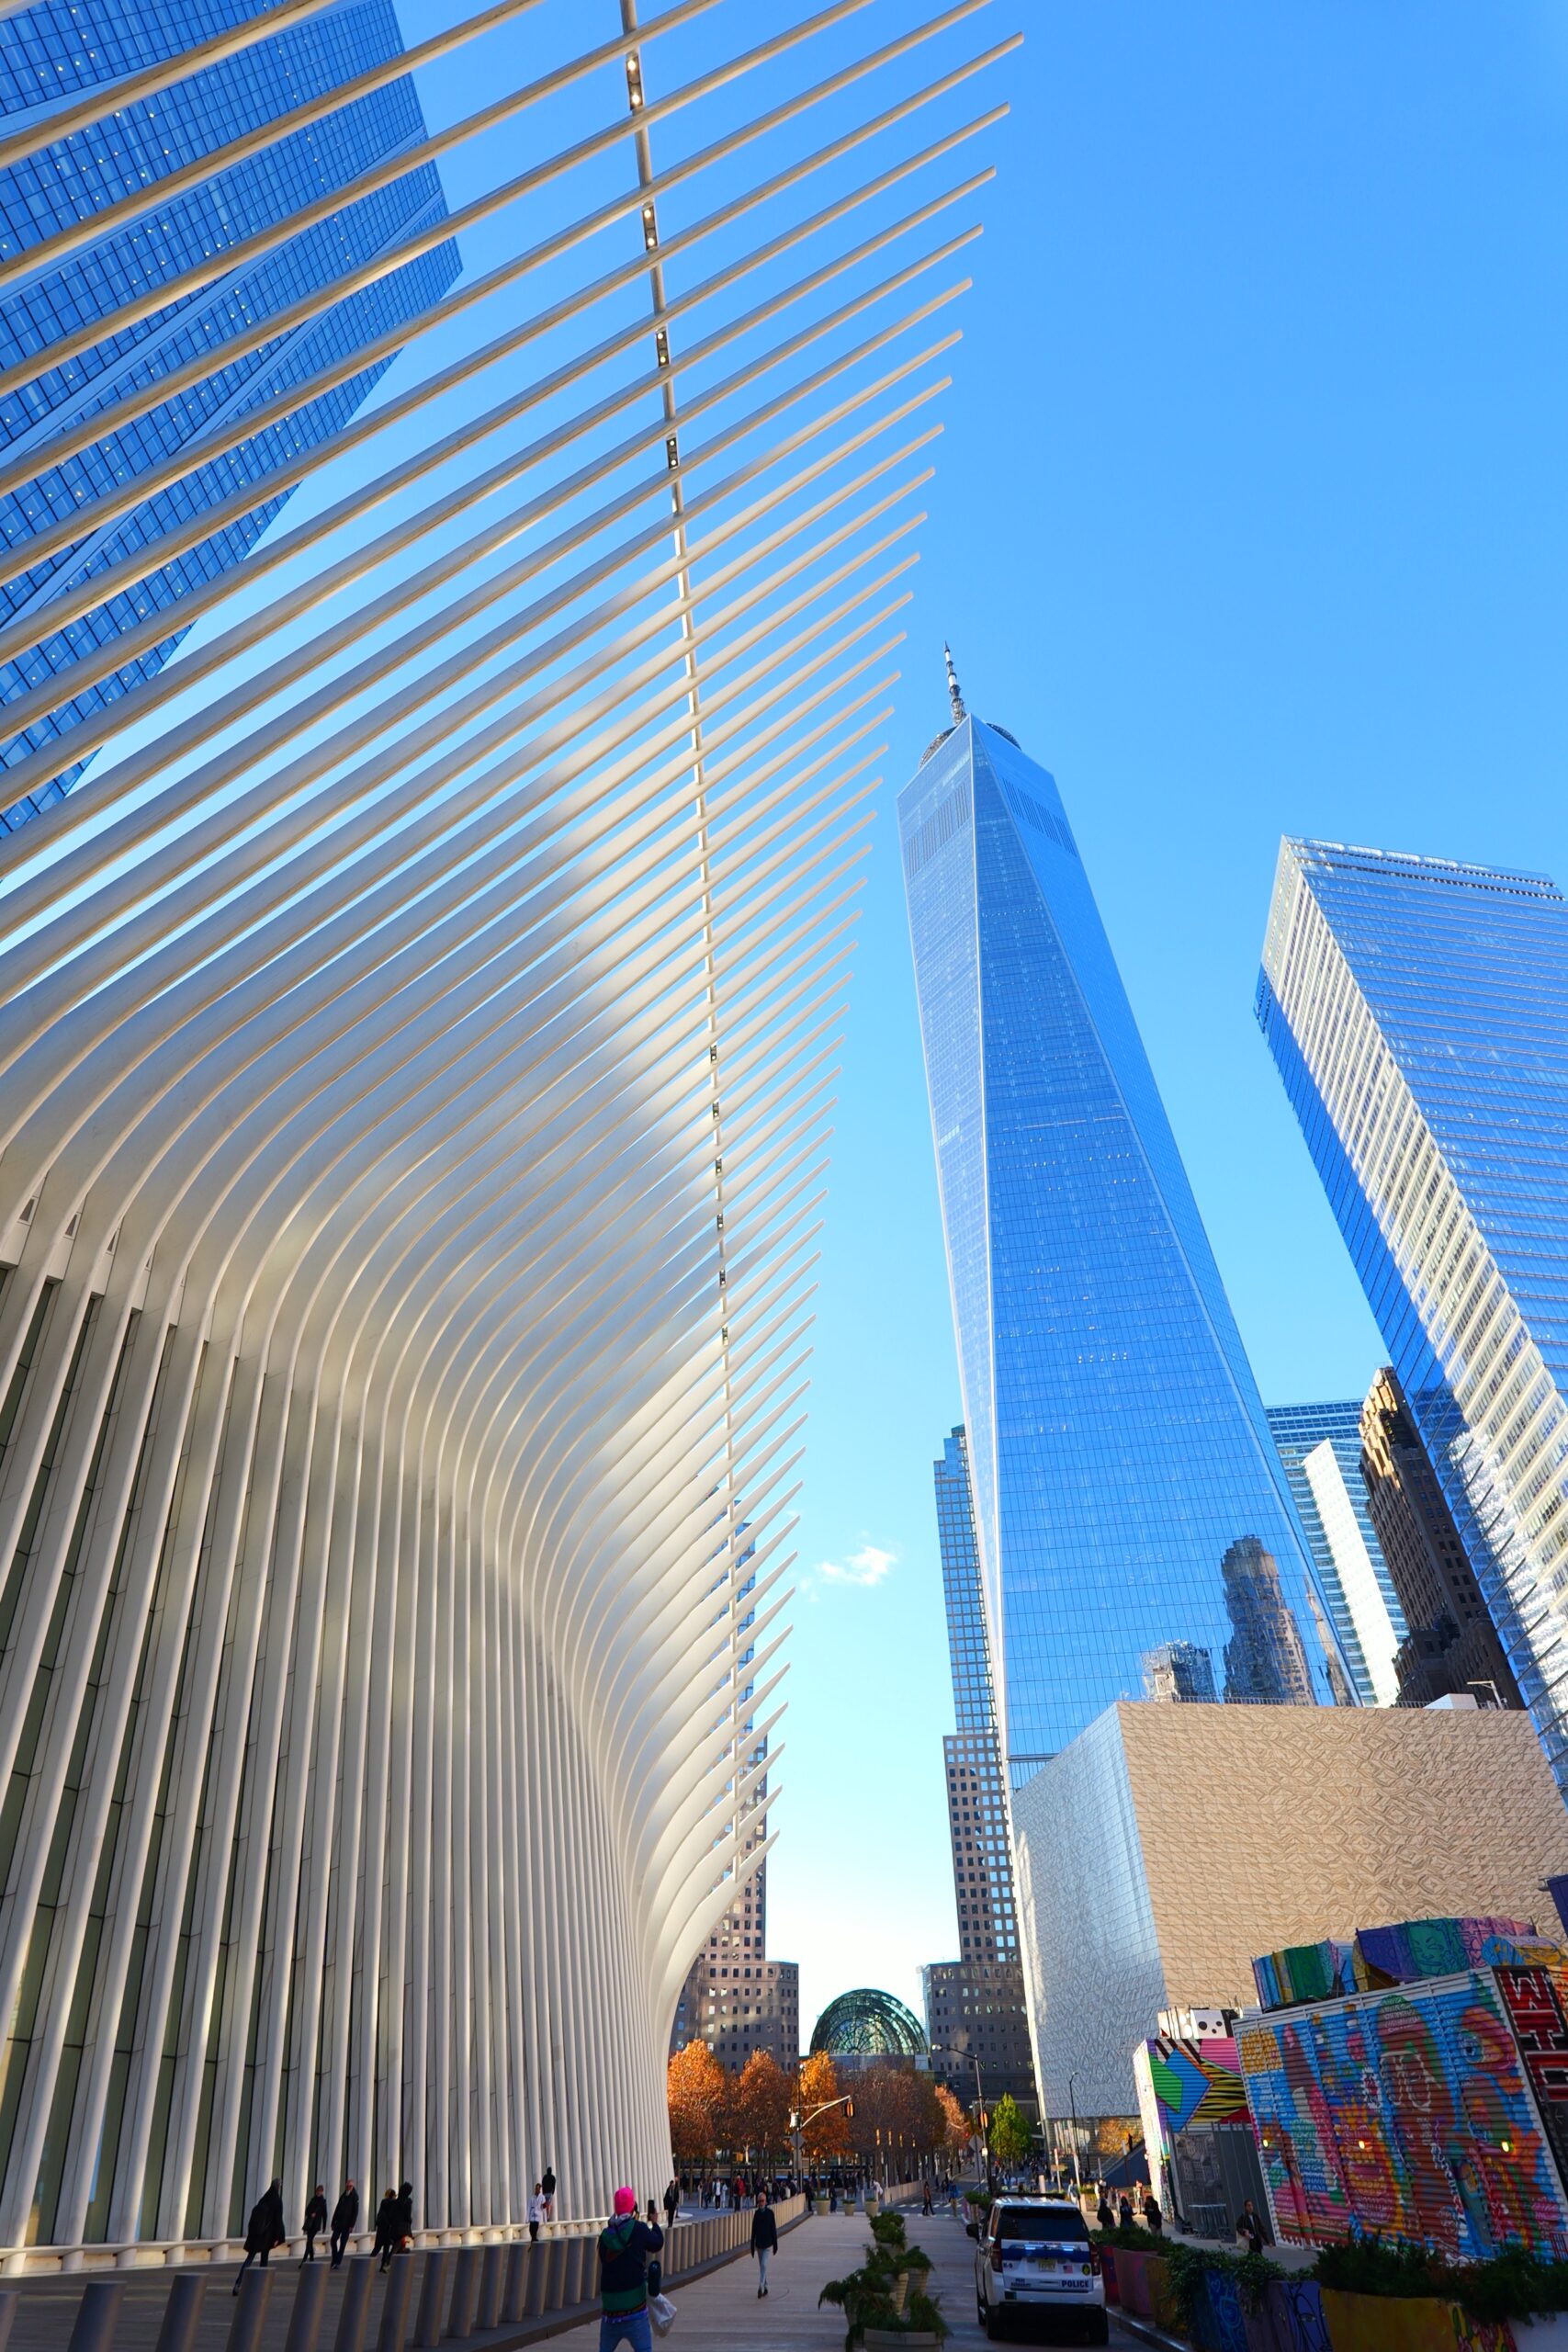 Image of the WTC. Blue sky, blue glass building. It’s really tall. Oculus in foreground left, it’s white